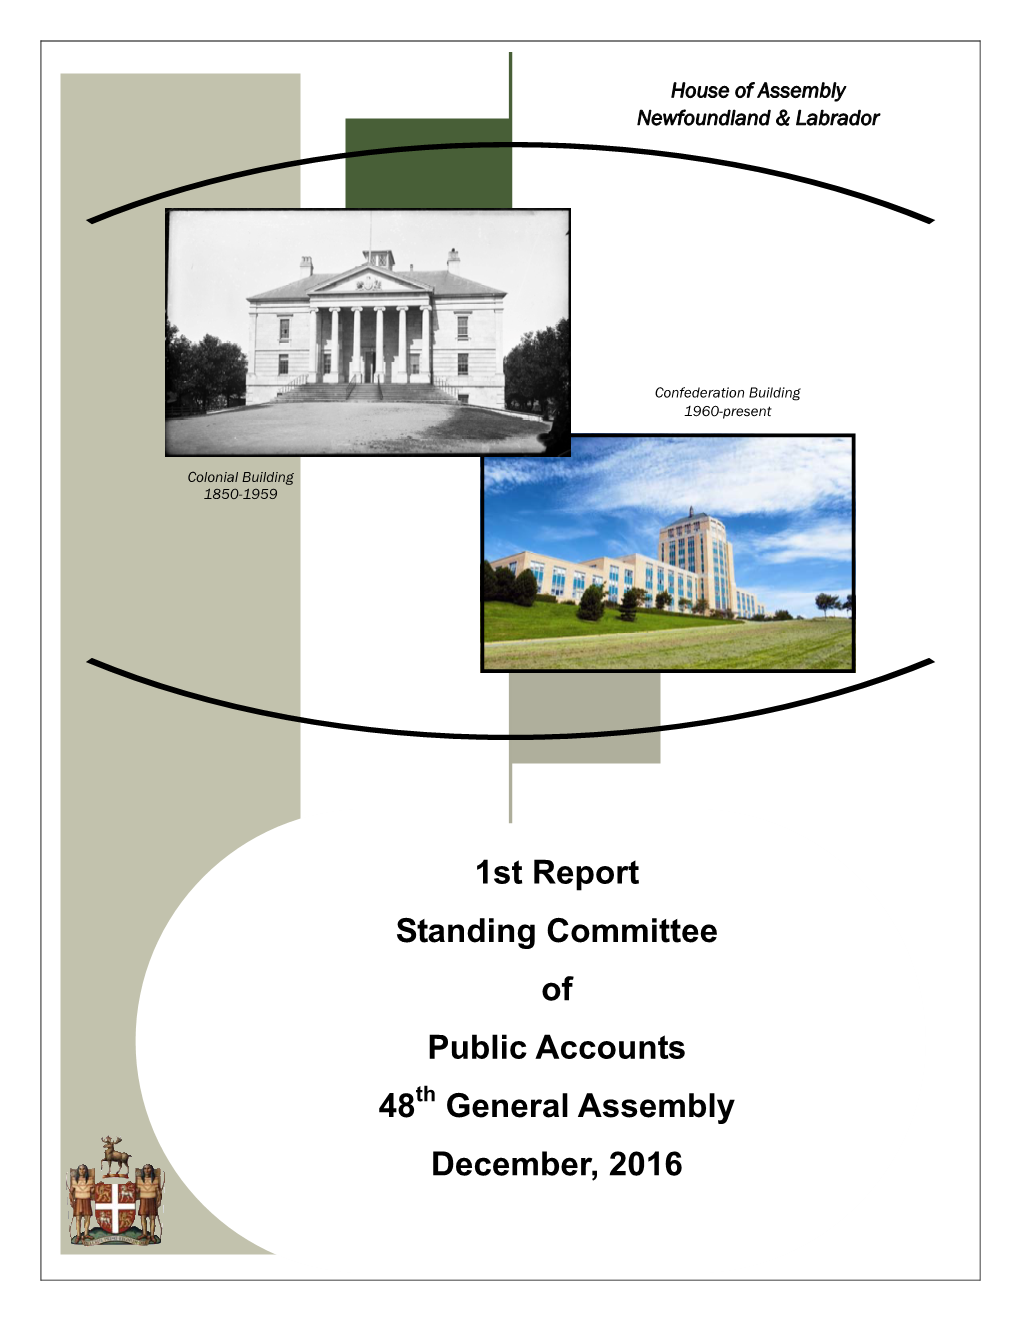 1St Report Standing Committee of Public Accounts 48 General